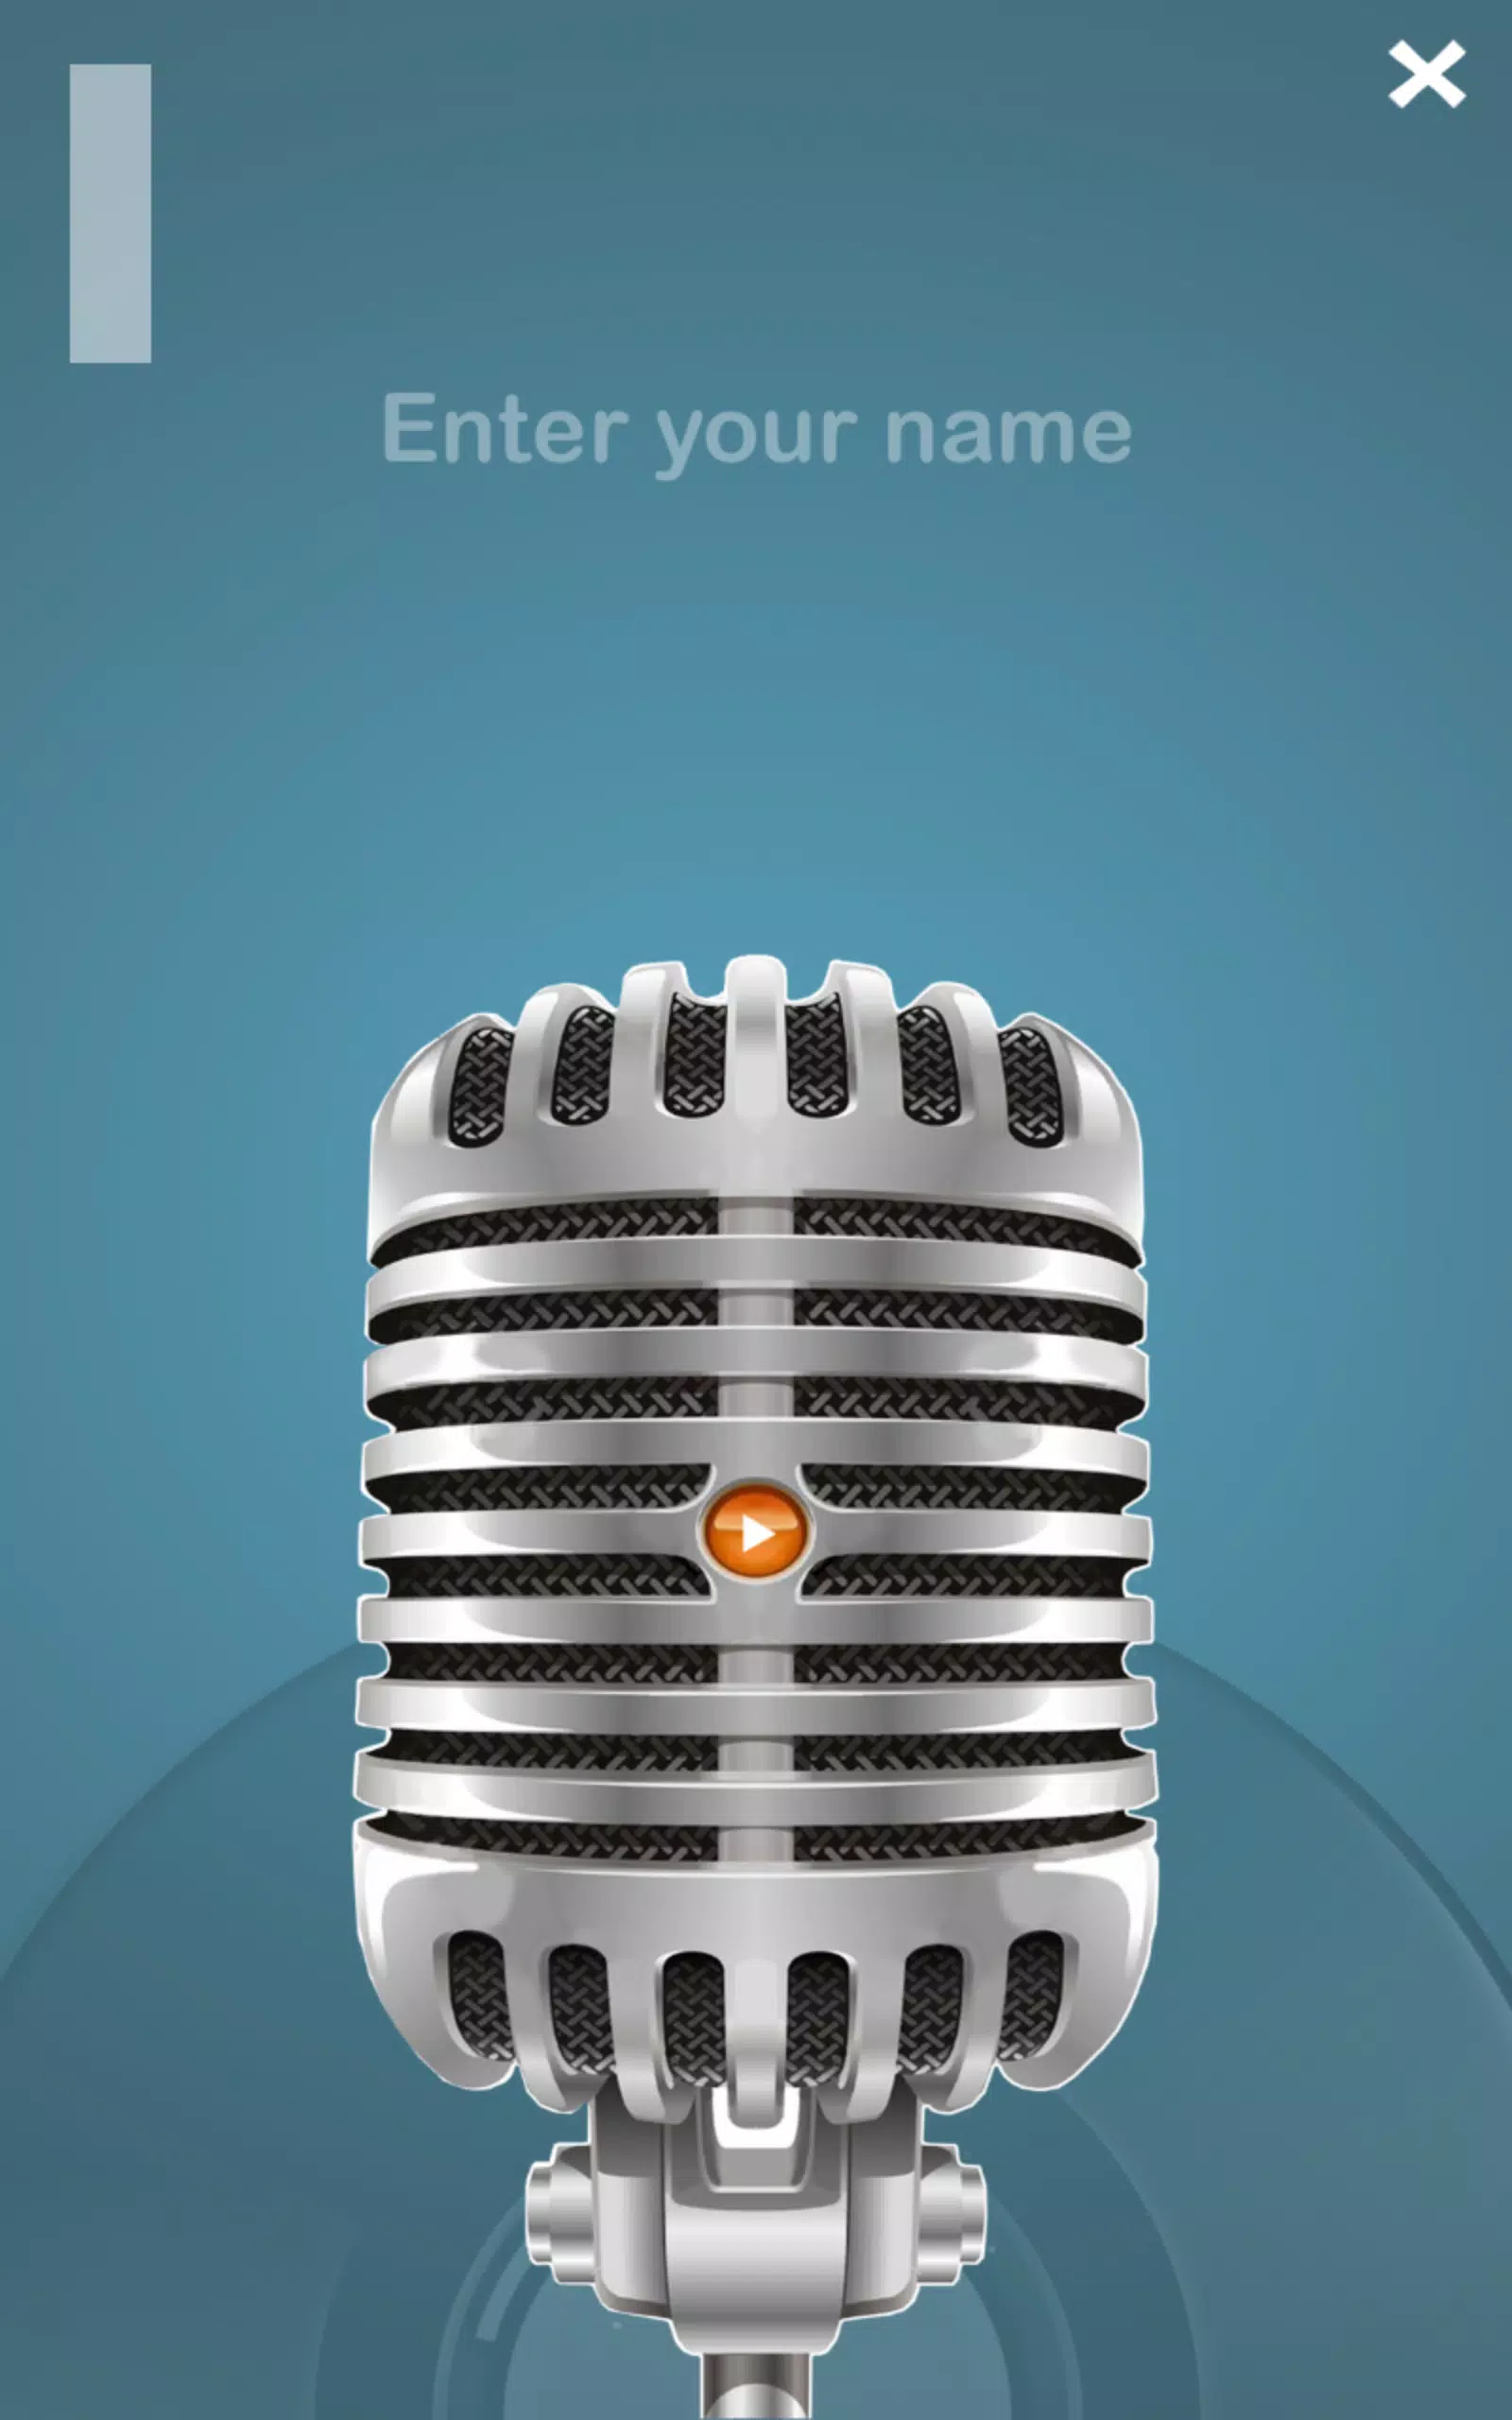 We Sing Pop Mic for Android - APK Download